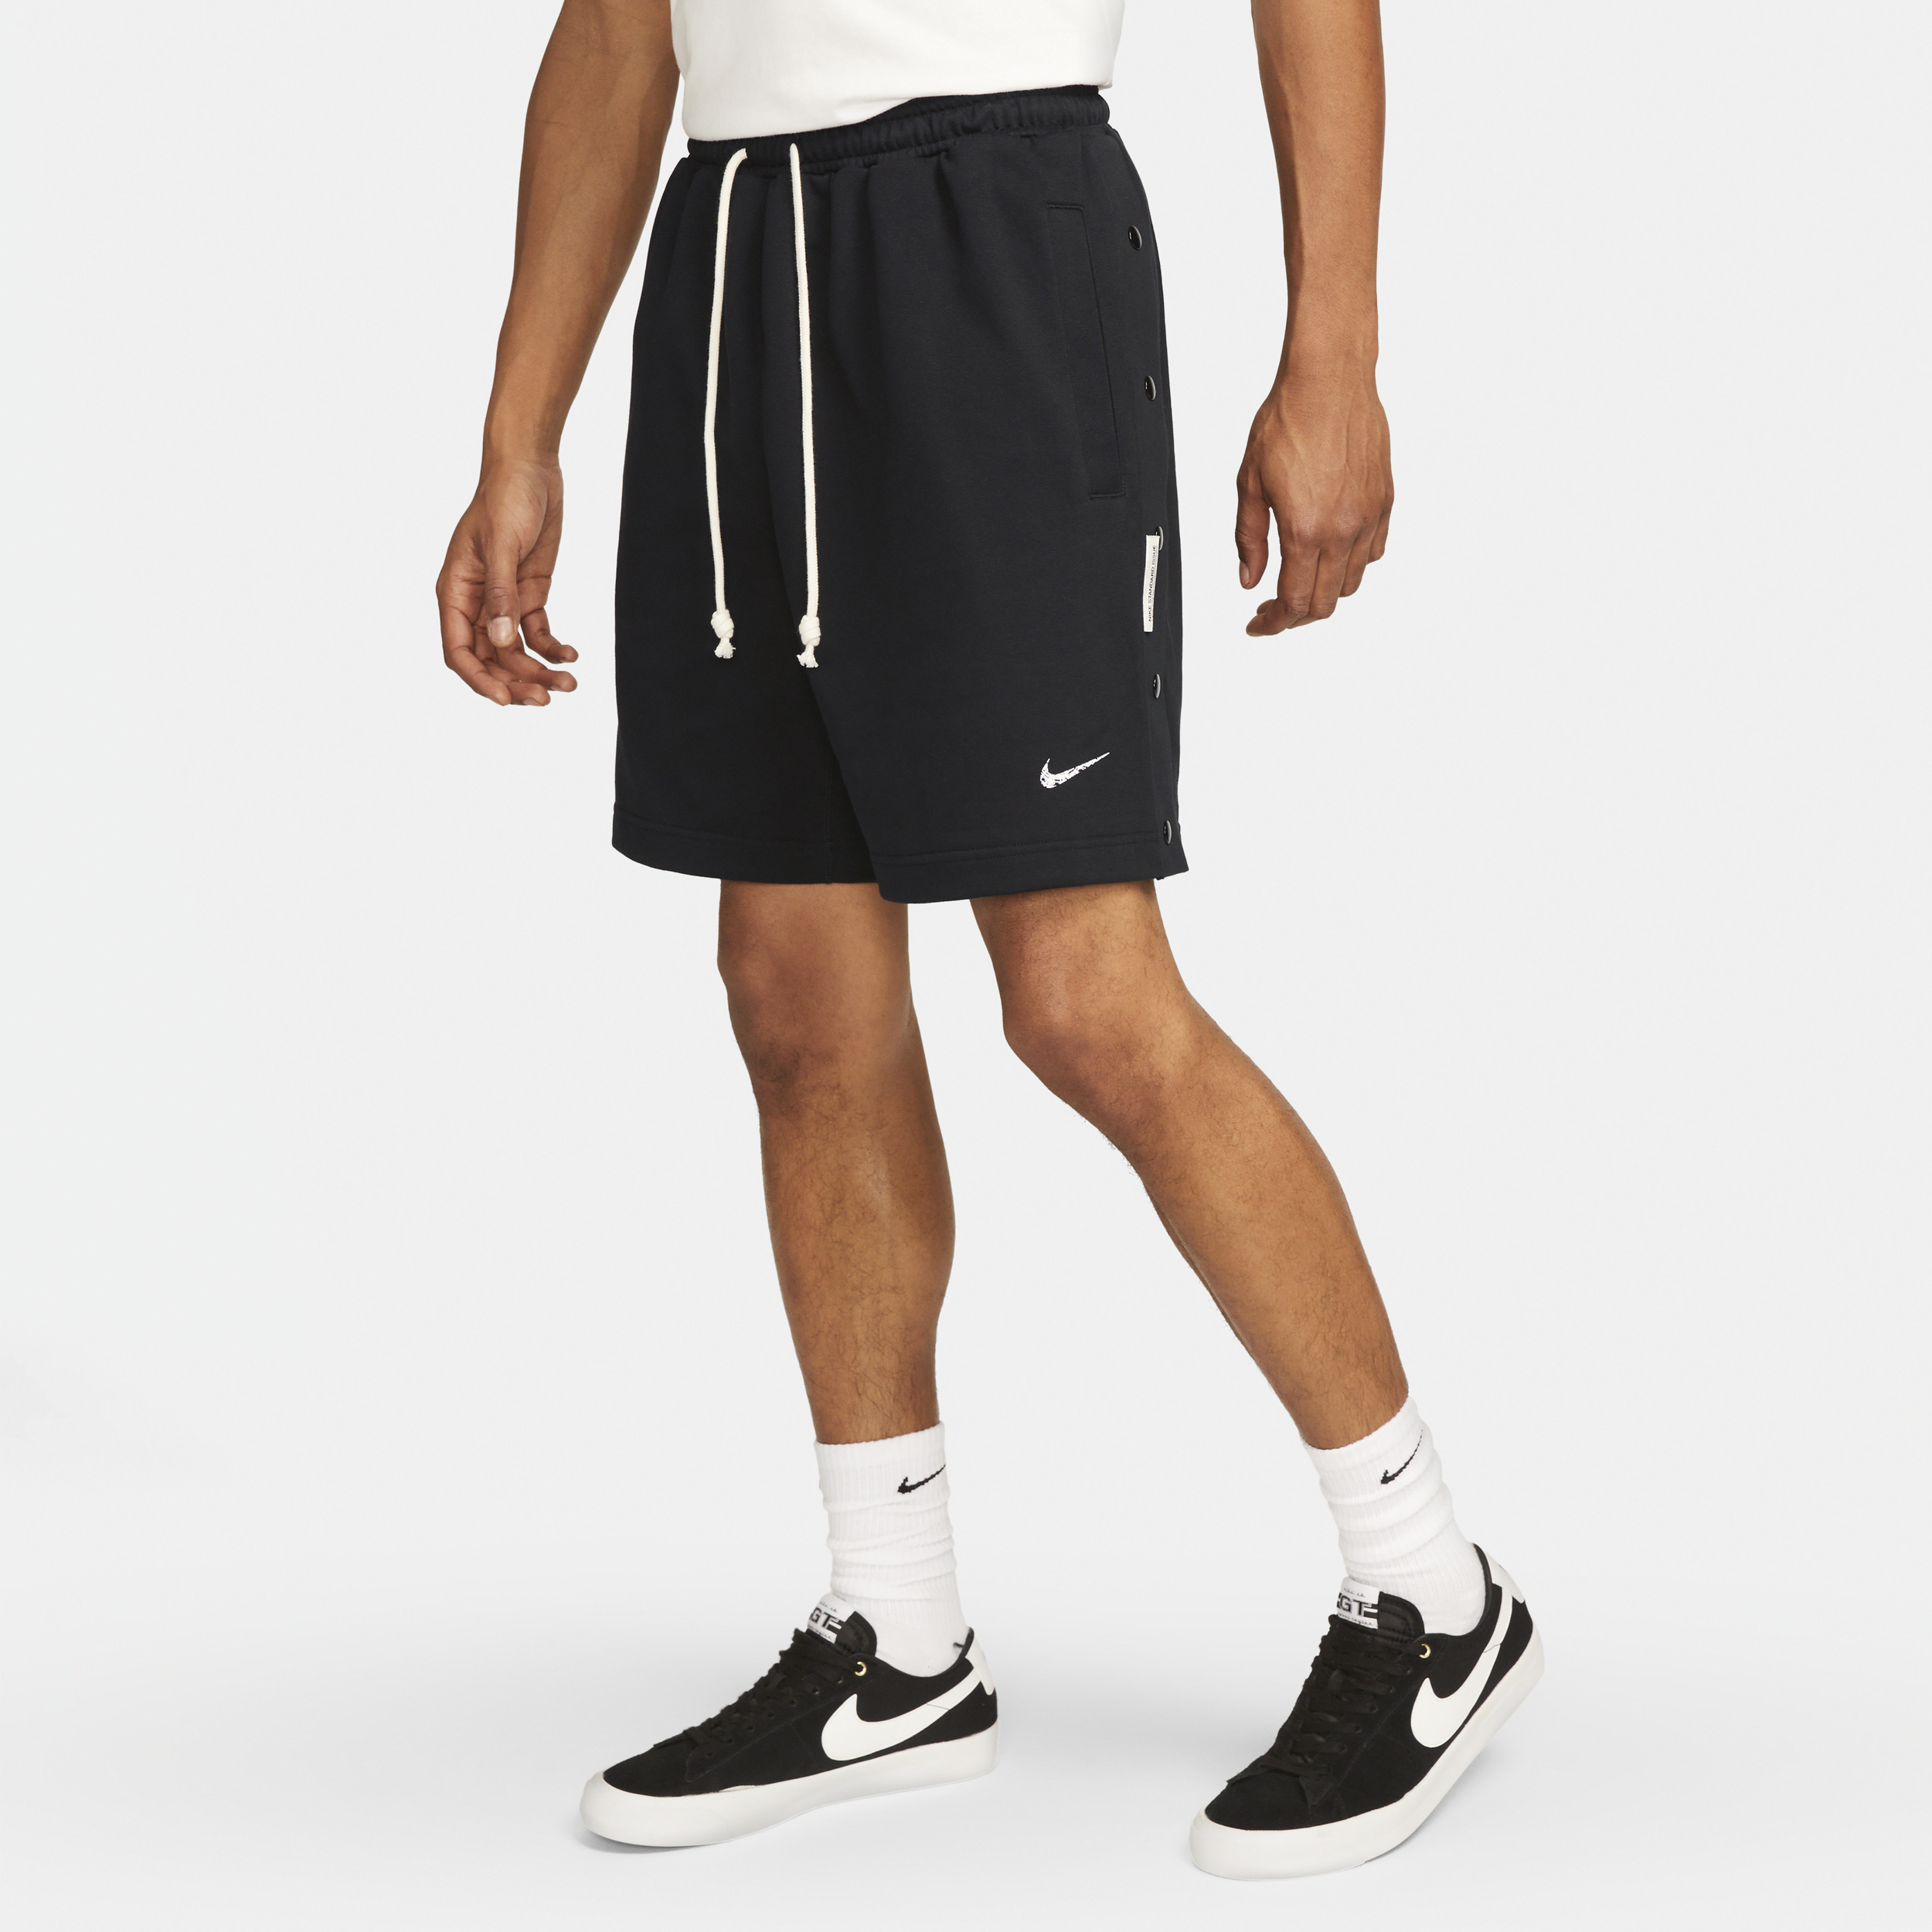 NIKE MEN'S DRI-FIT STANDARD ISSUE 8" FRENCH TERRY BASKETBALL SHORTS,1012564079